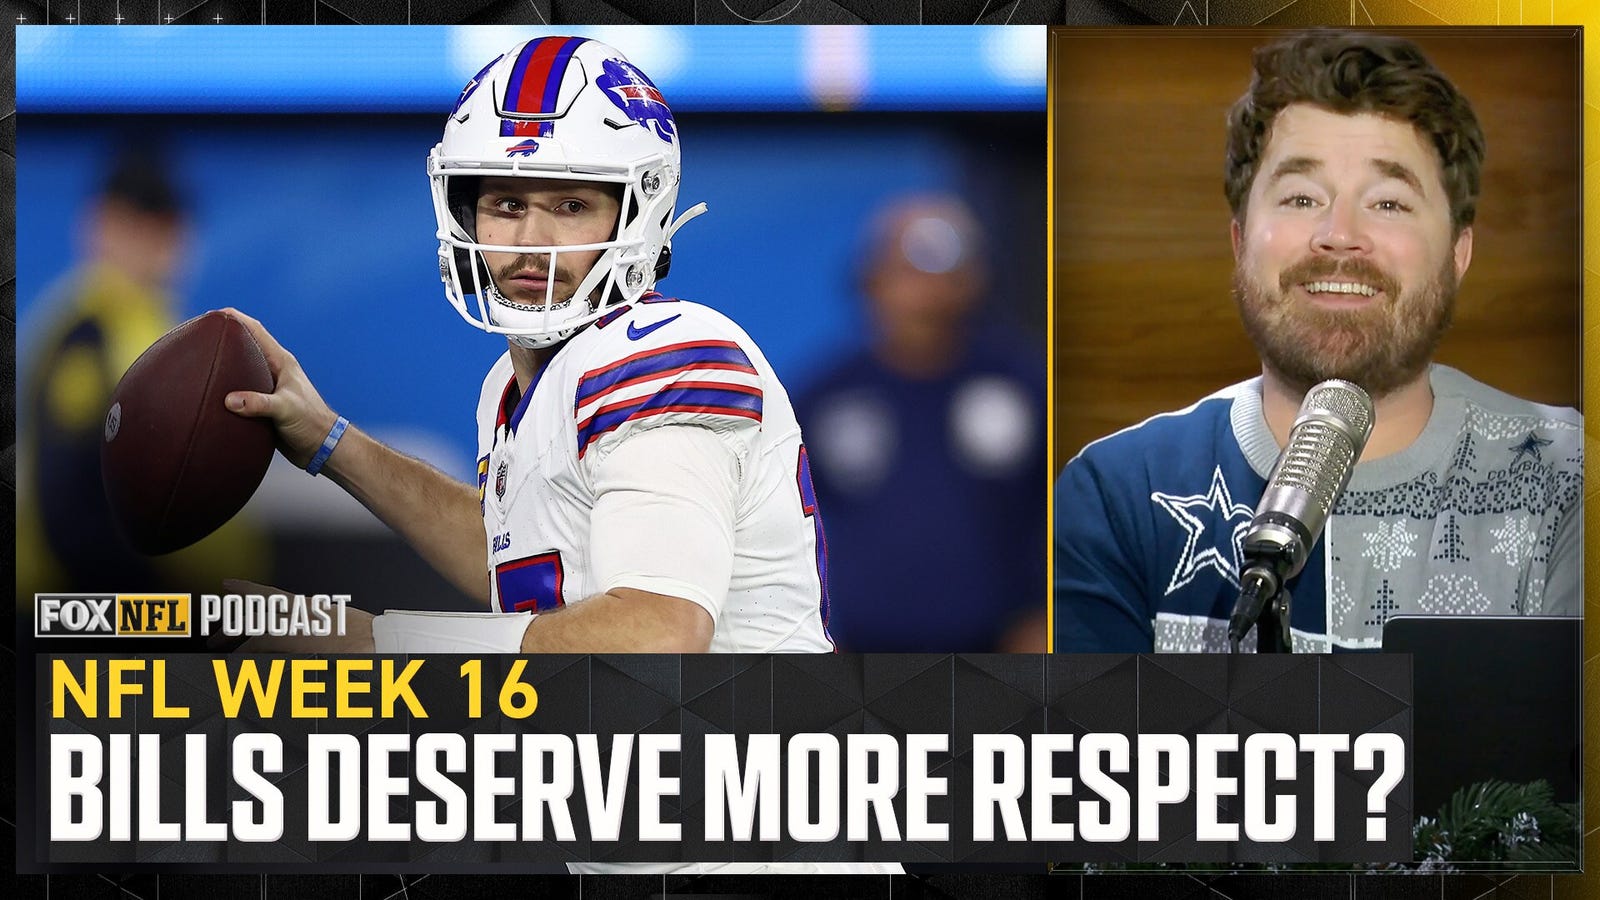 Does Josh Allen, Buffalo Bills deserve more RESPECT after resilient win vs. Chargers?